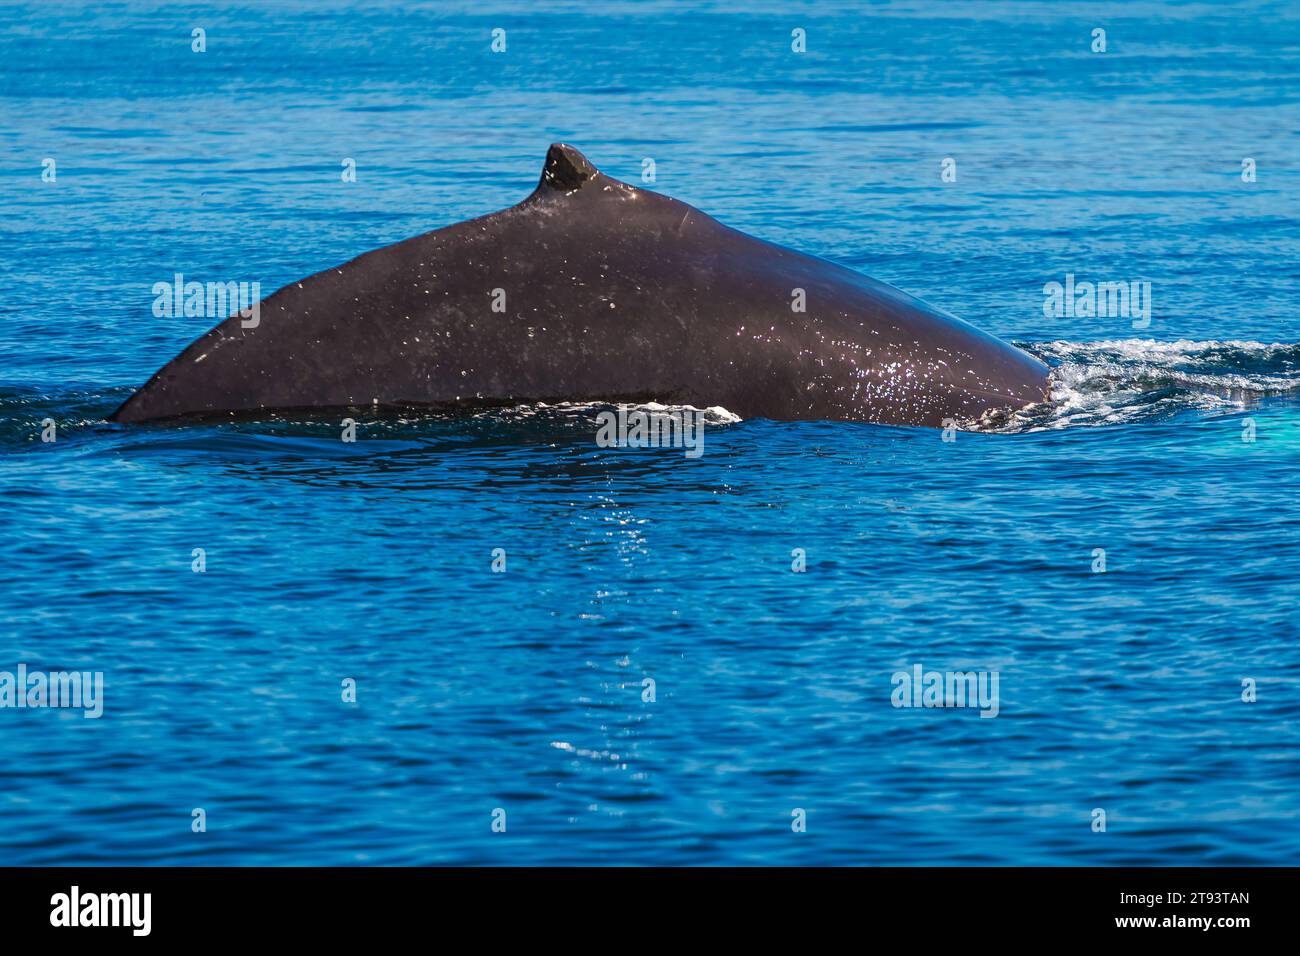 Close-up view of adult Hump Back Whale Dorsal Fin Stock Photo